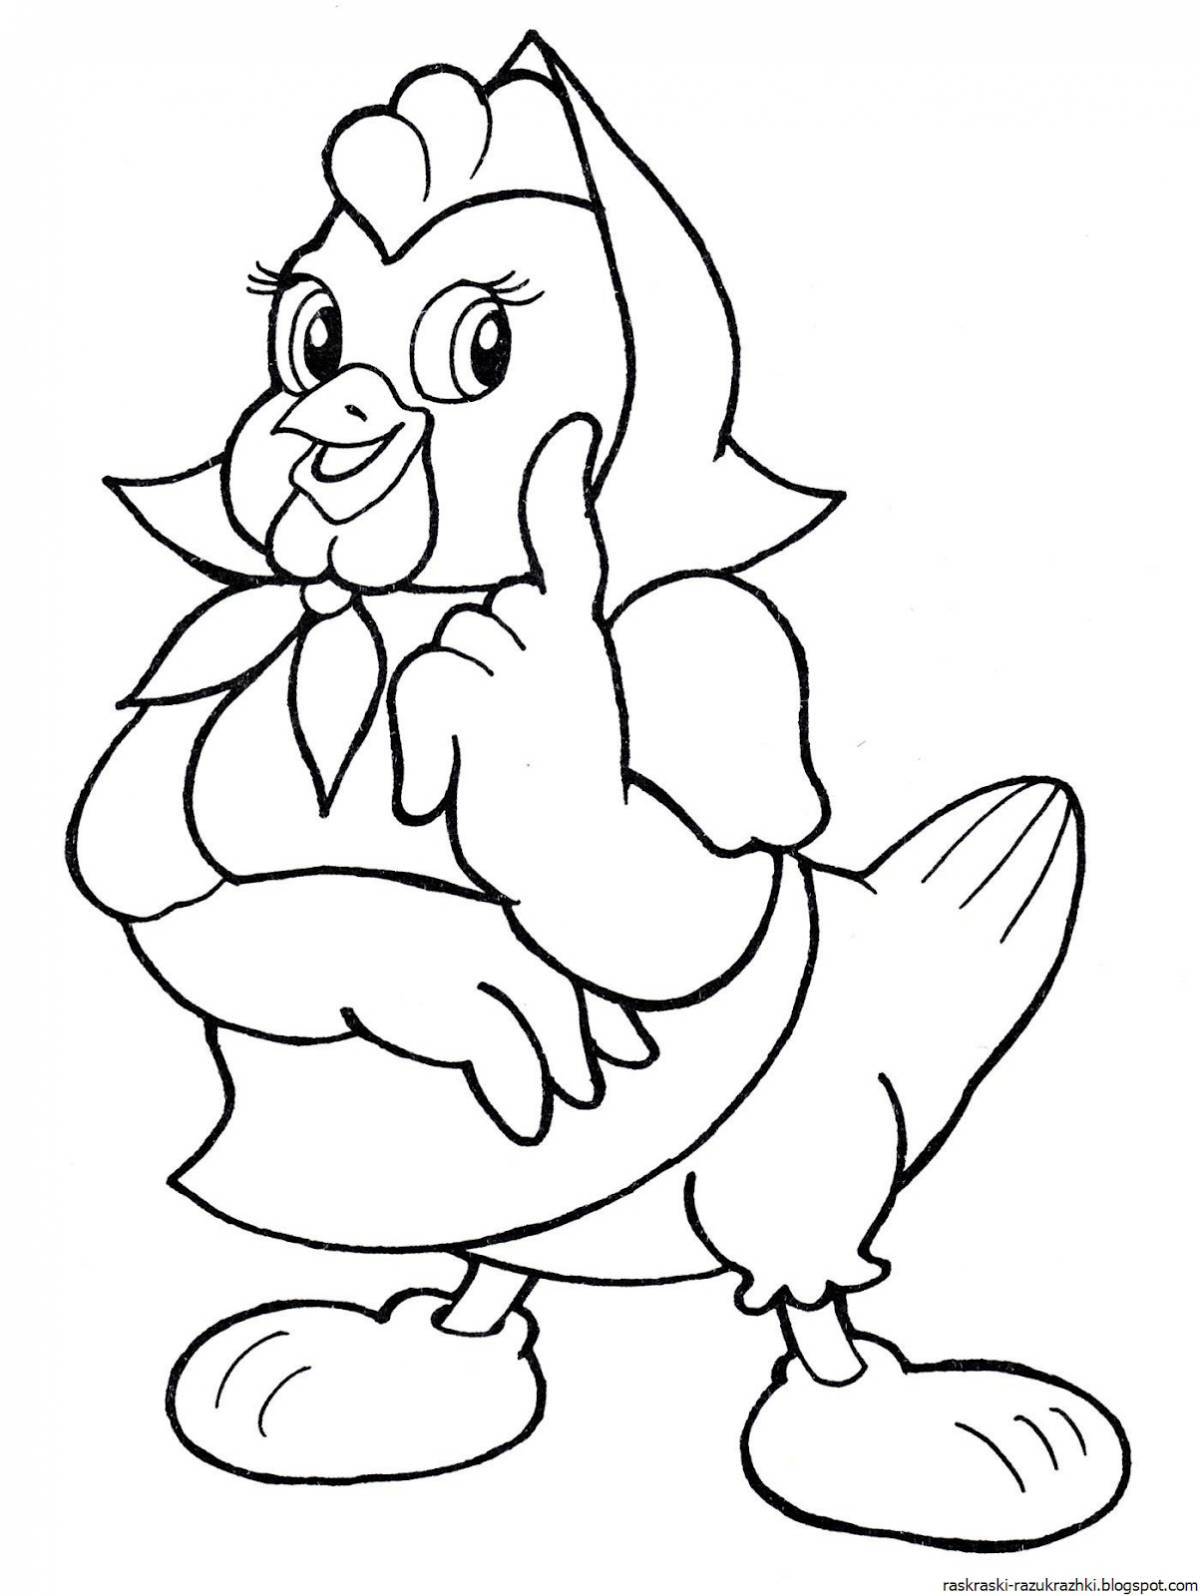 Humorous chicken coloring book